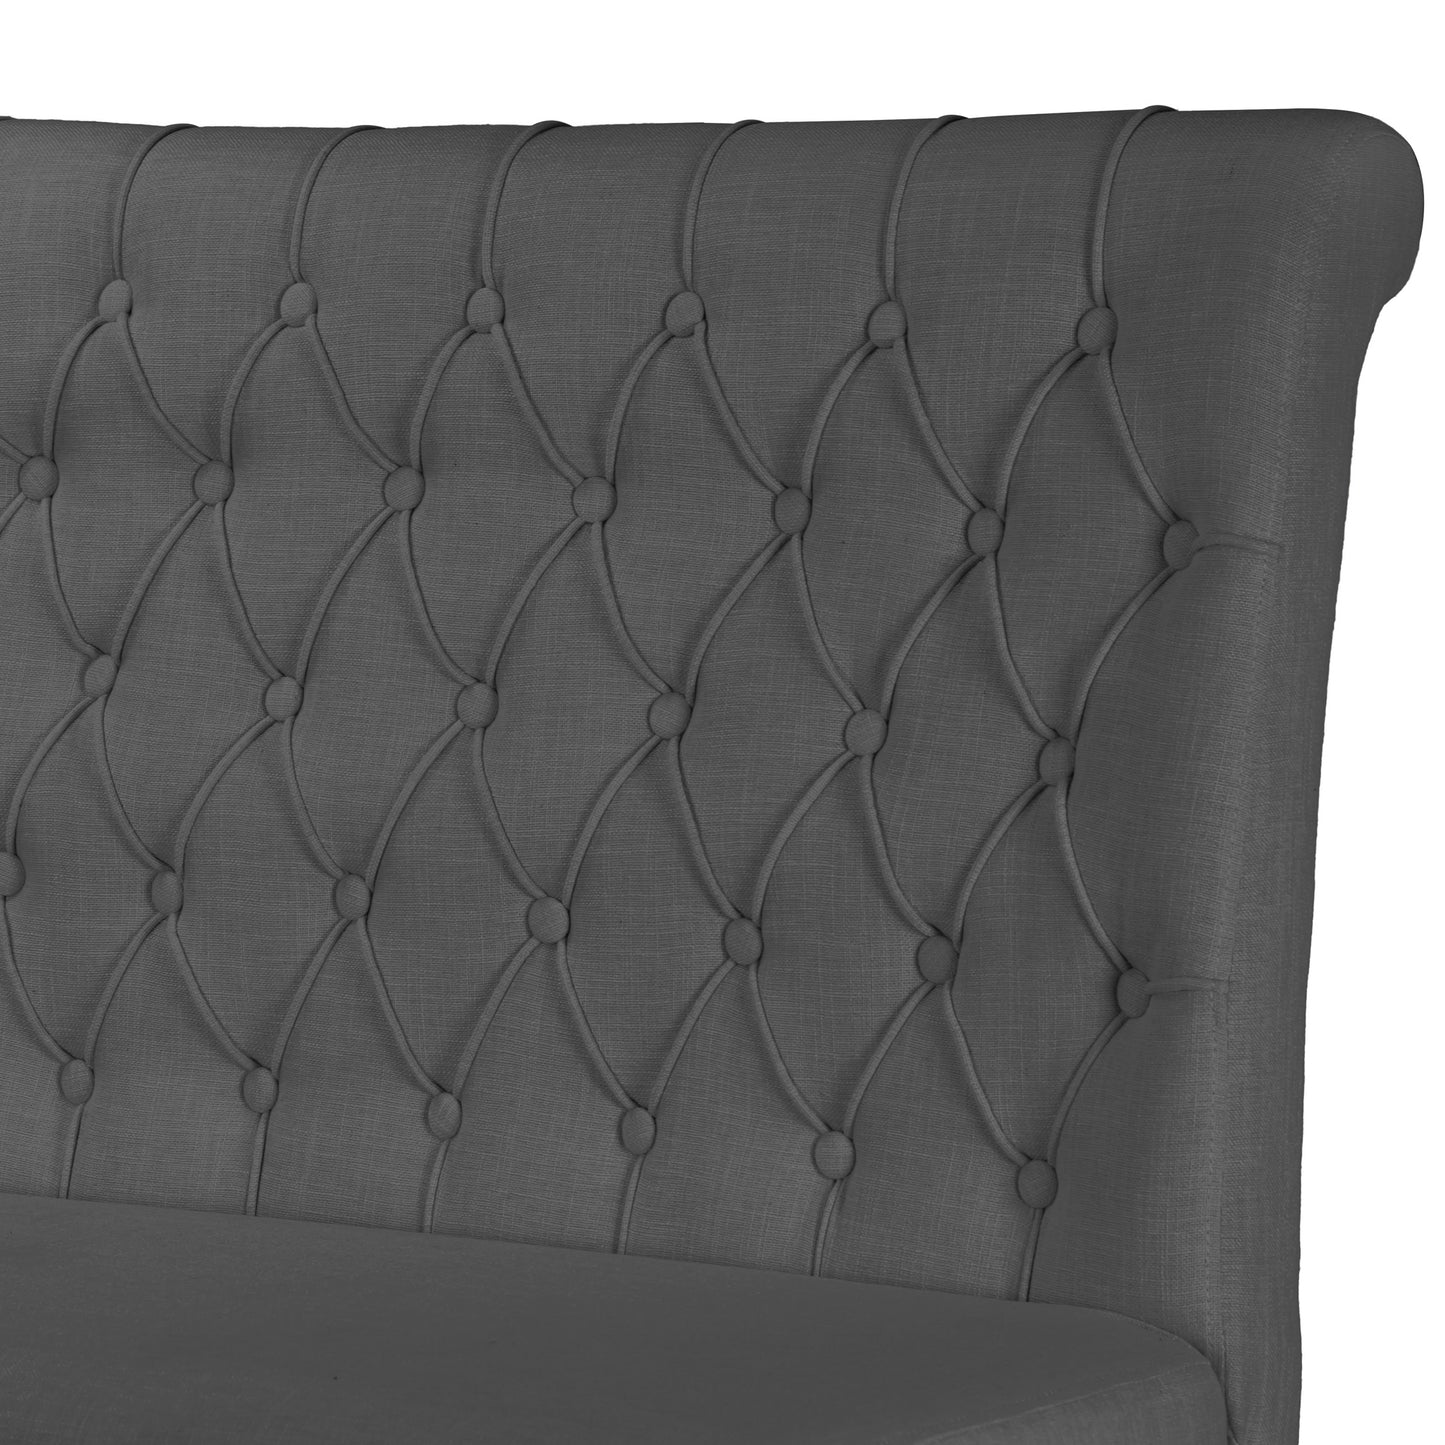 Alisa Grey Upholstered Settee Banquette Bench Loveseat with Button Tufting